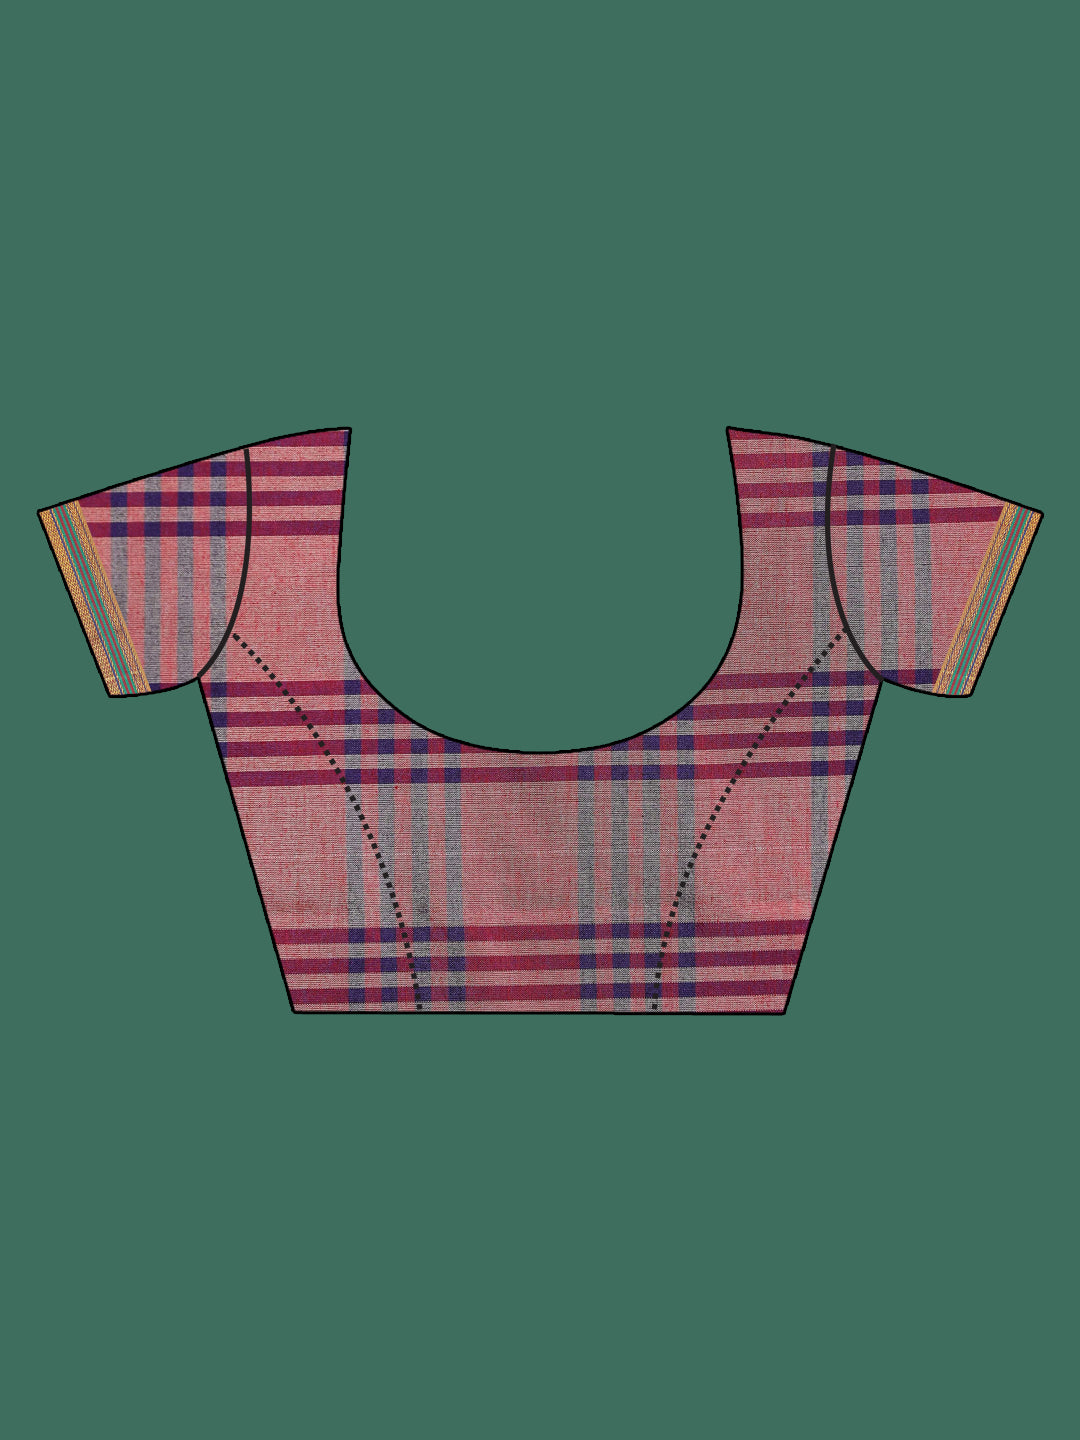 Indethnic Pink Checked Saree - Blouse Piece View